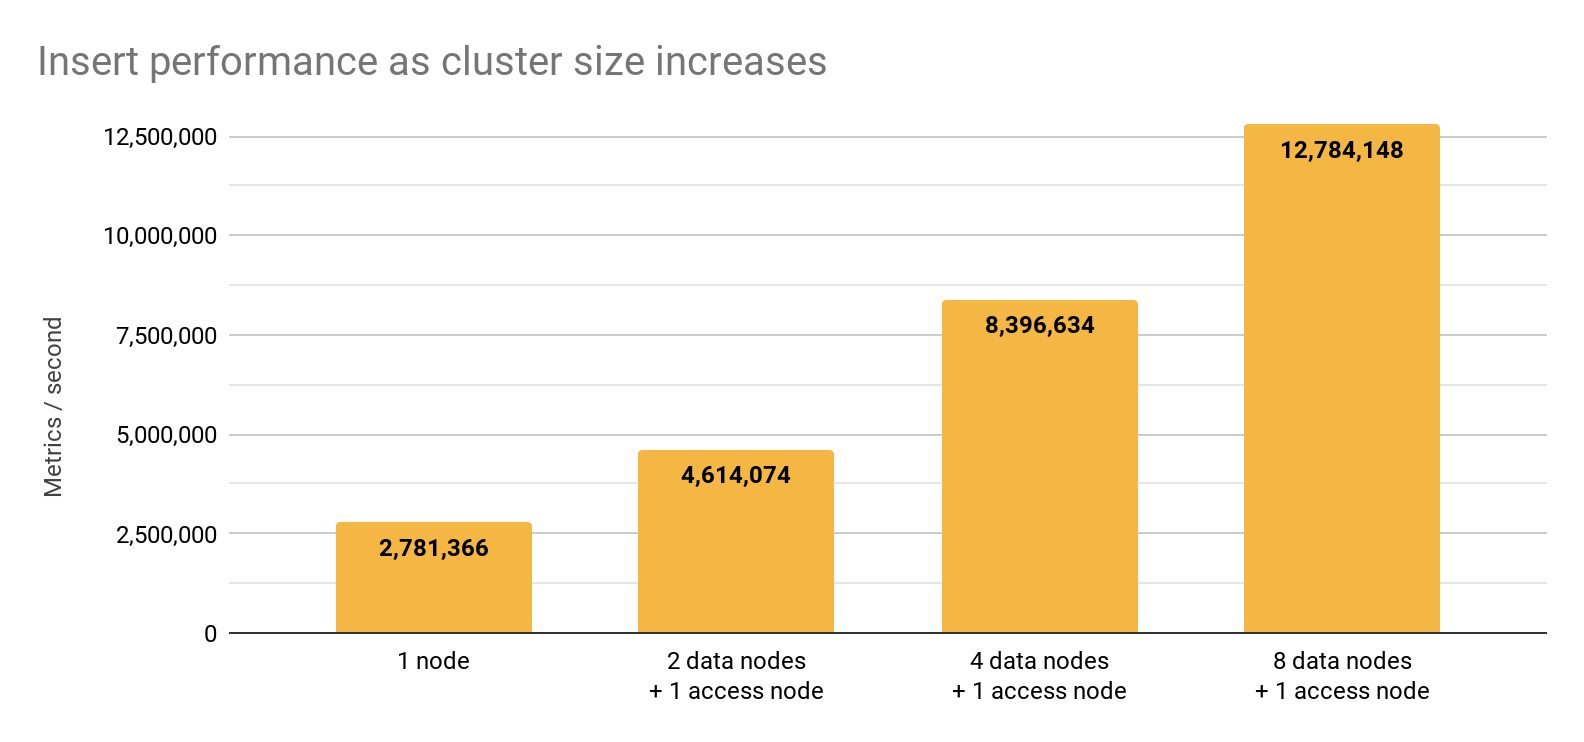 Bar graph showing insert performance as cluster size increases